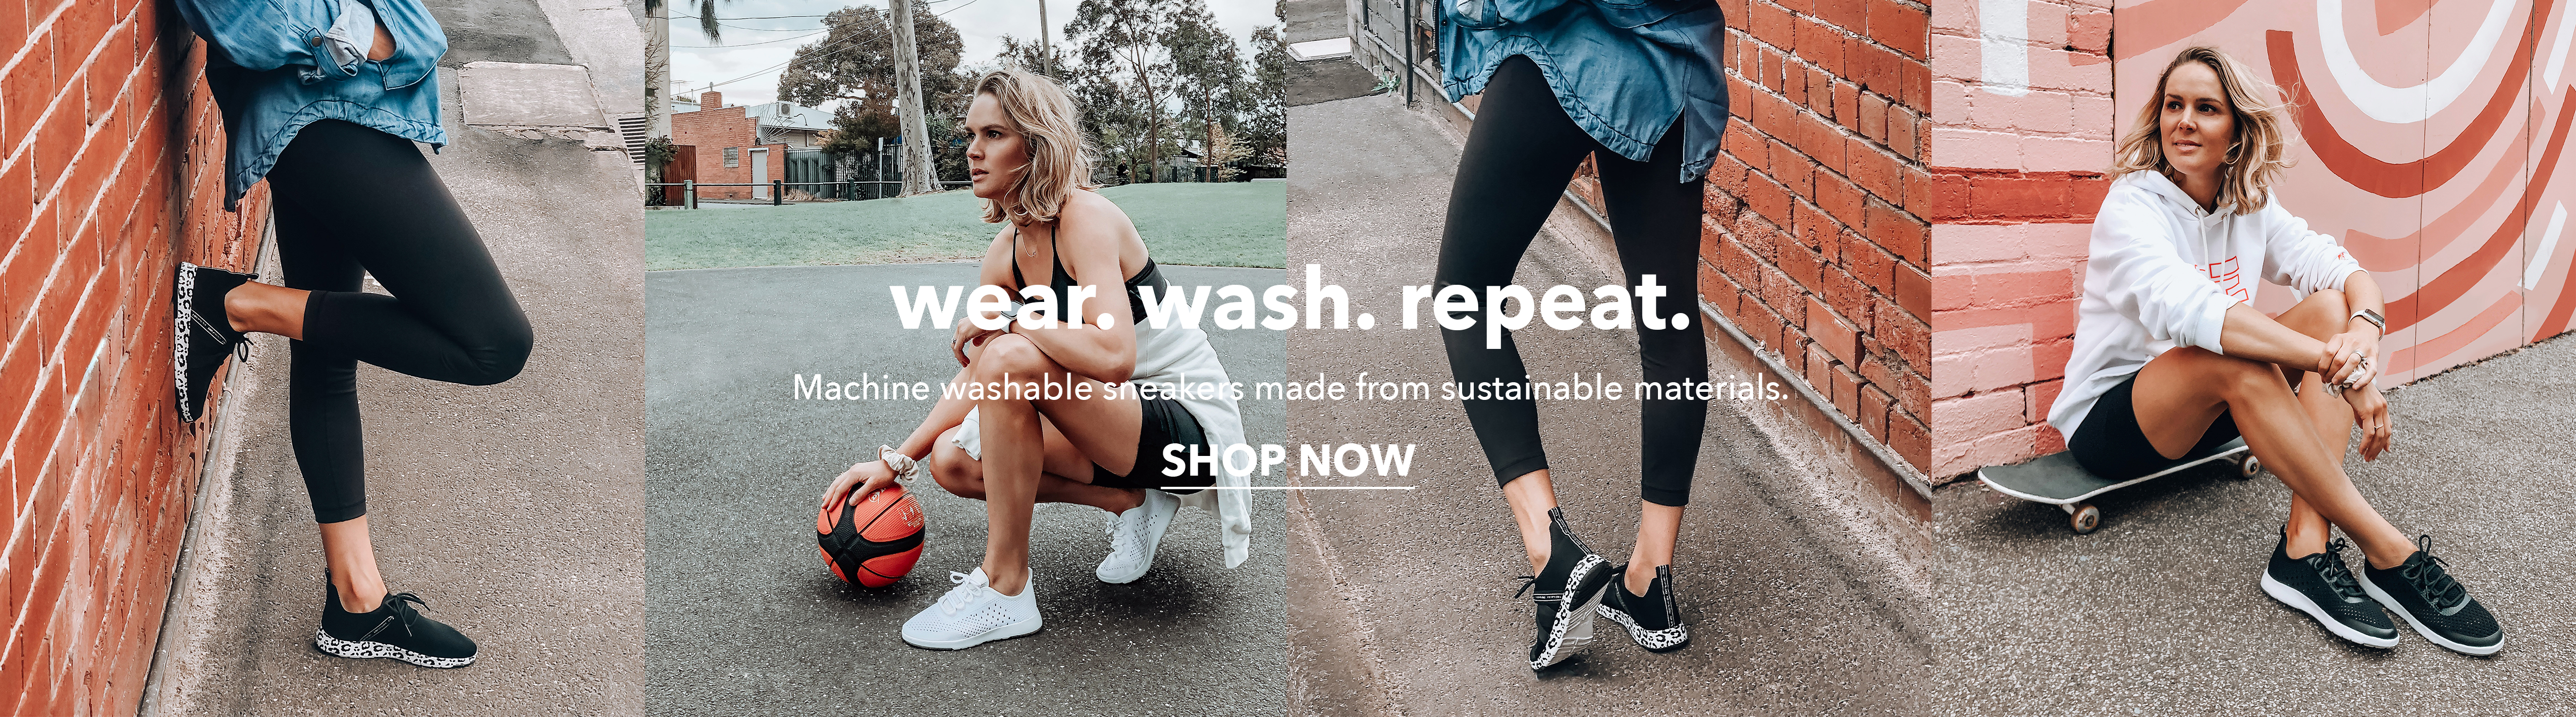 Wear. Wash. Repeat. Machine washable sneakers made from sustainable materials.